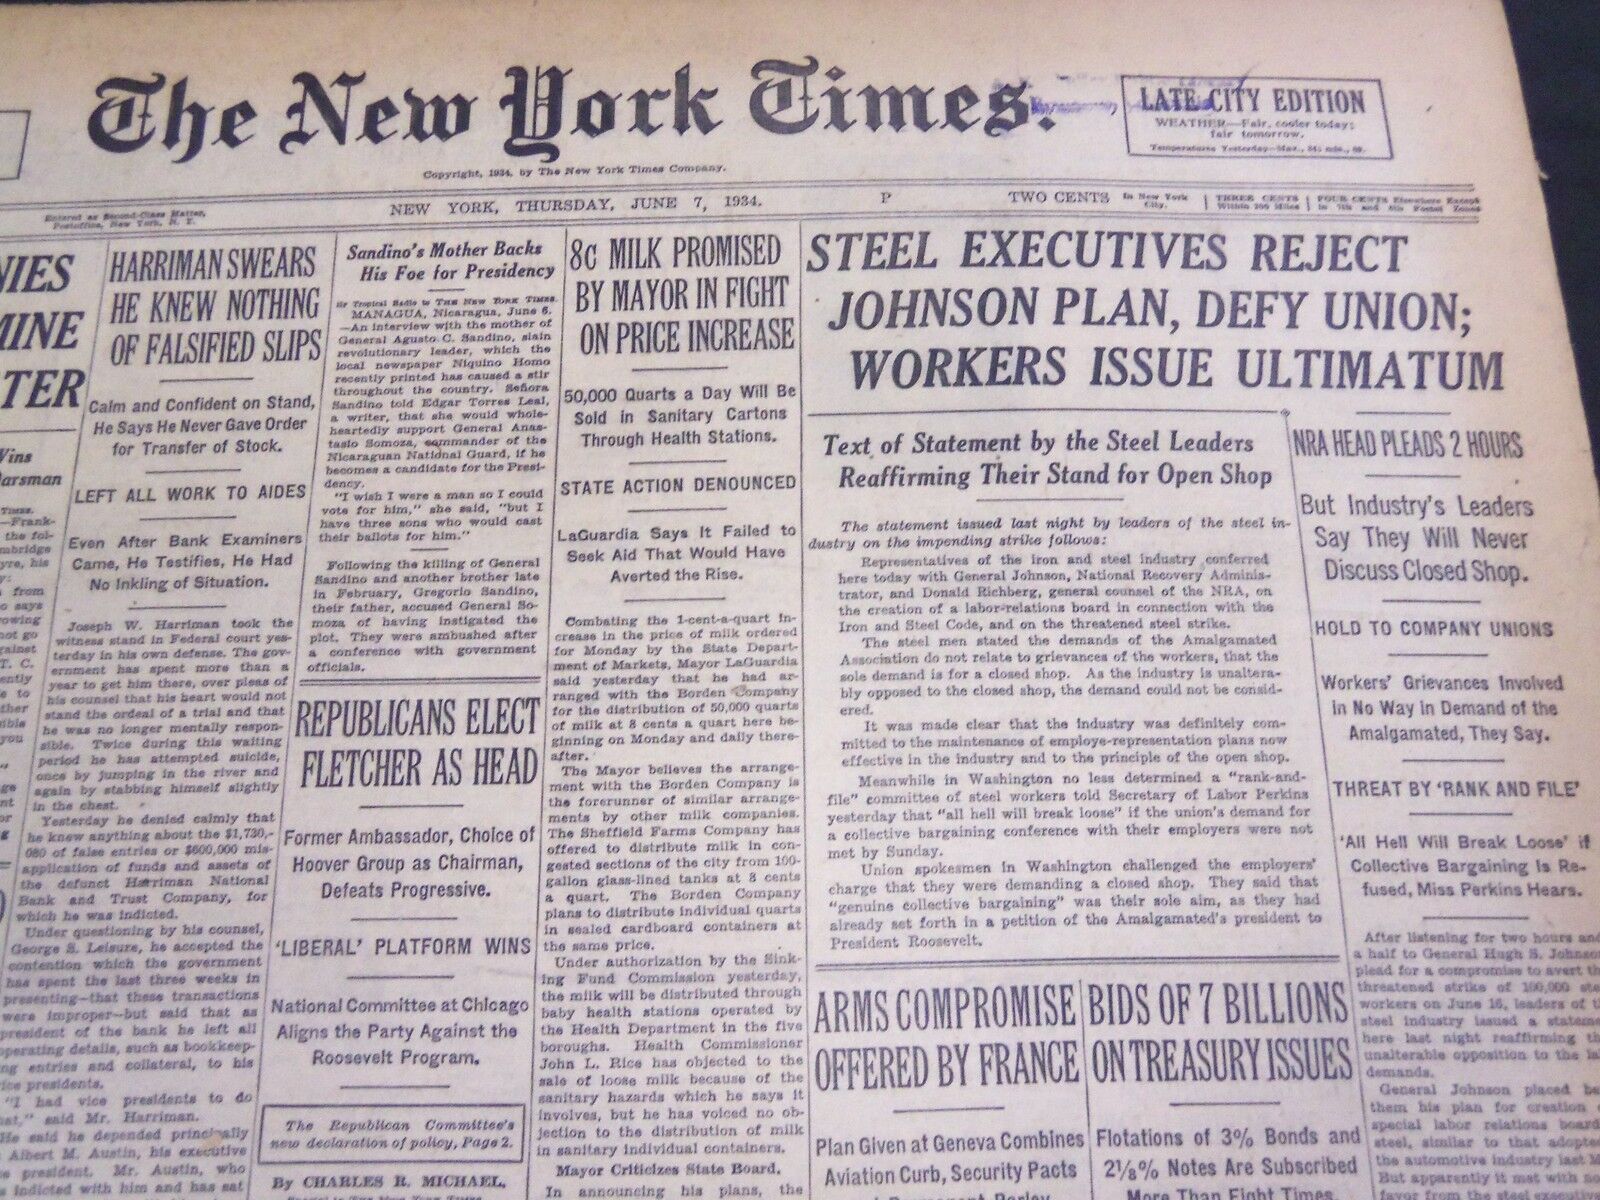 1934 JUNE 7 NEW YORK TIMES - STEEL EXECUTIVES REJECT JOHNSON PLAN - NT 4207